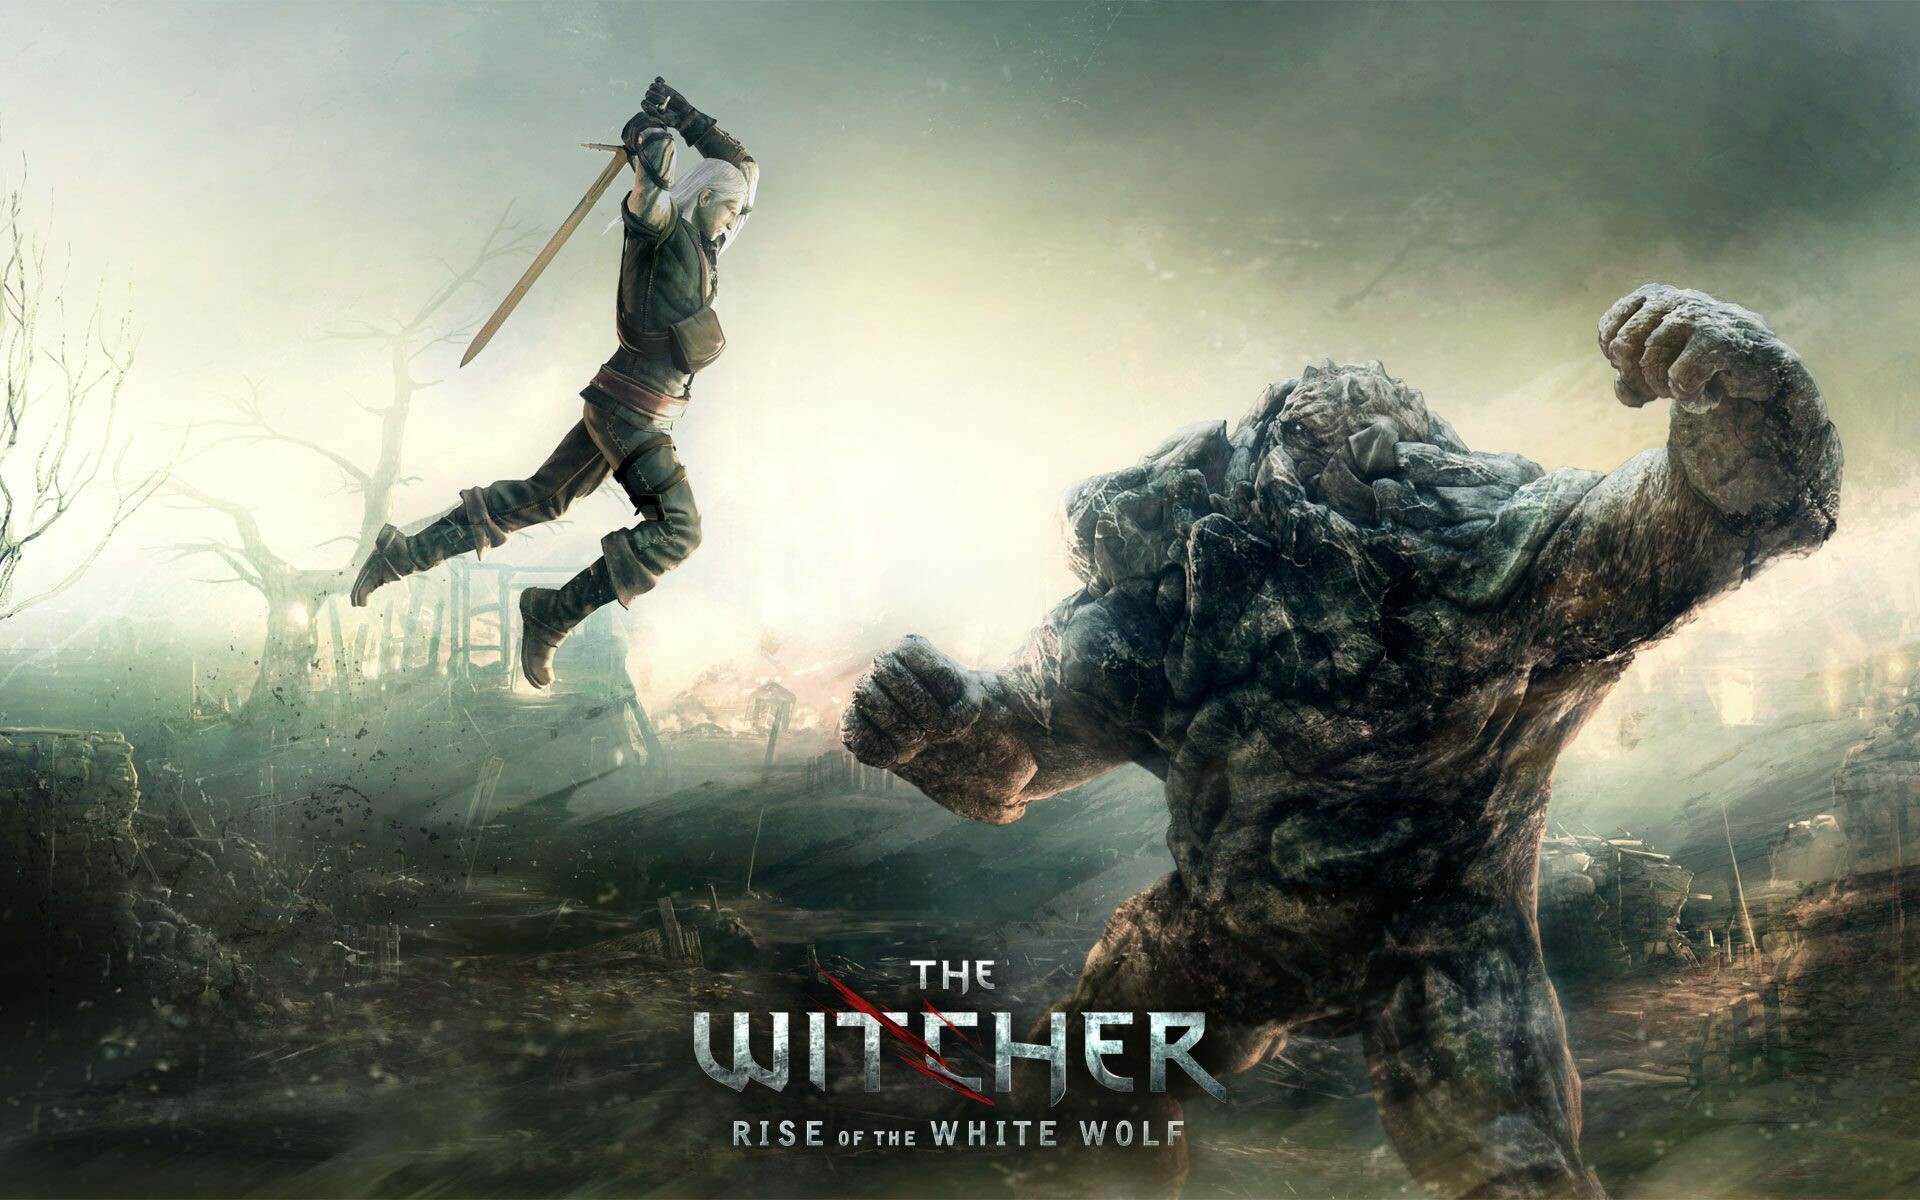 The Witcher (Game): Rise of the white wolf, CD Projekt, Video games. 1920x1200 HD Background.